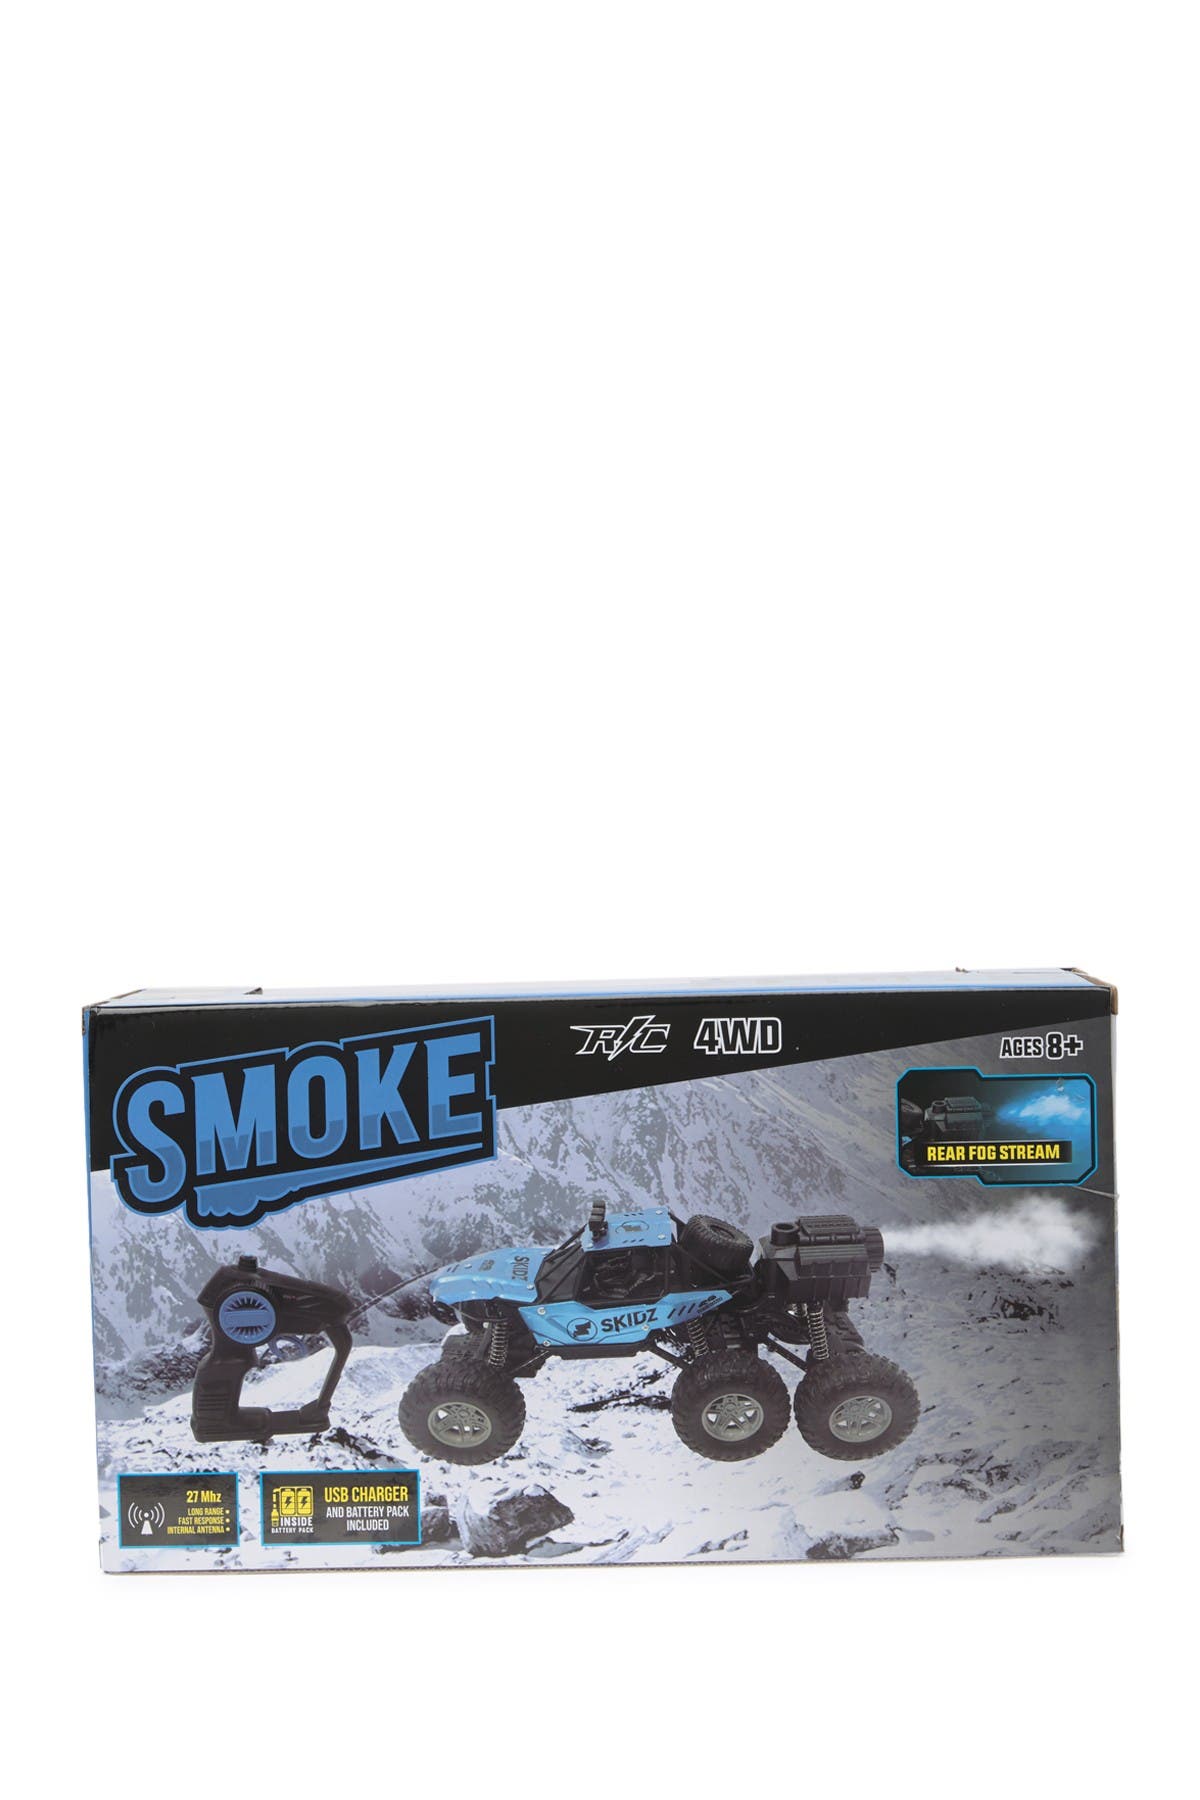 Skidz Rc Babies' (tm) Steam Exhaust Car In Color May Vary